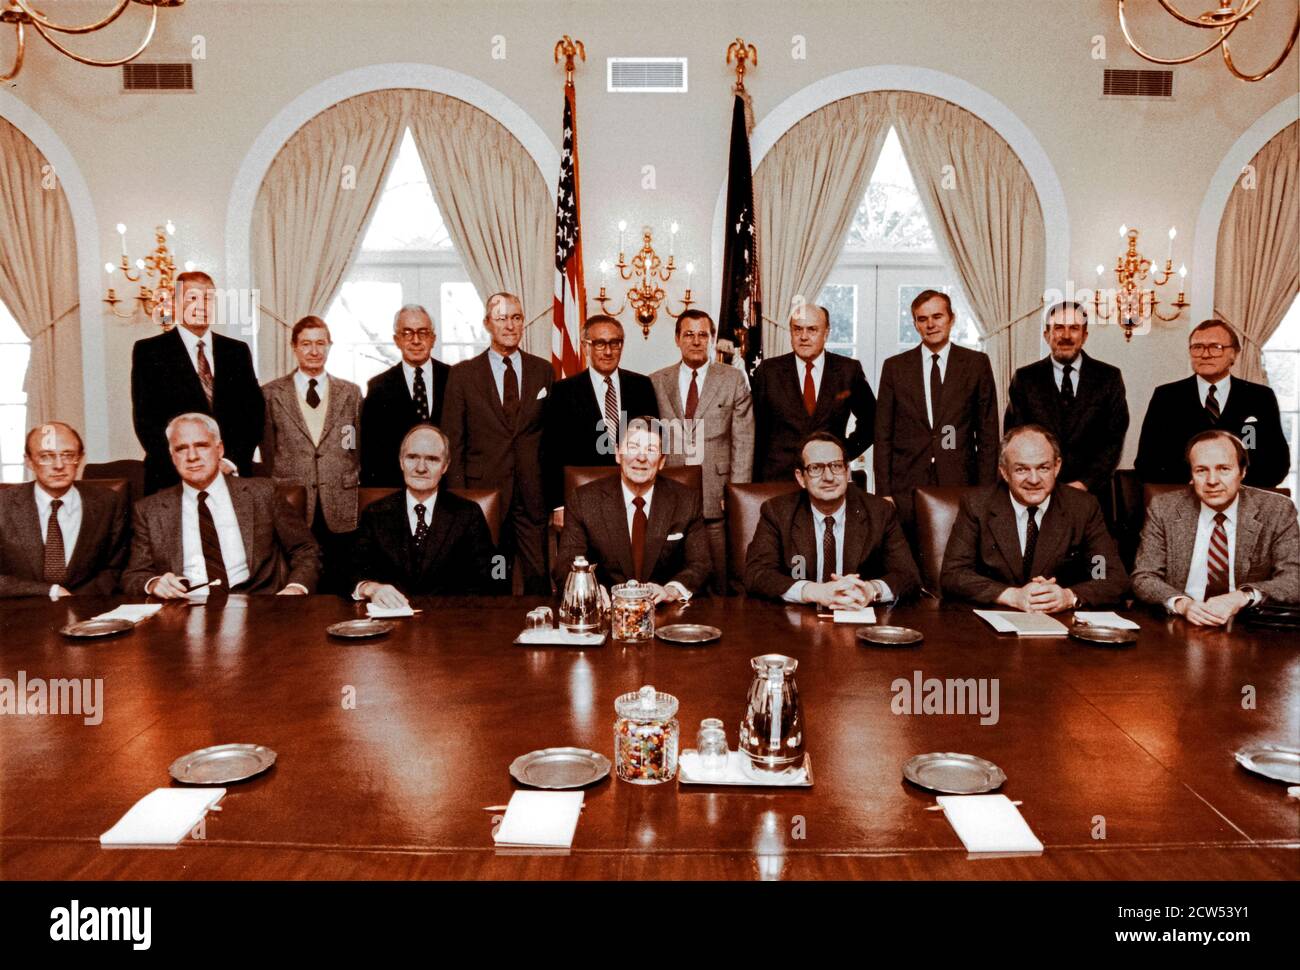 In this photo released by the White House, United States President Ronald Reagan poses with the President's Commission on Strategic Forces and the Special Counselors to the commission in in the Cabinet Room of the White House in Washington, DC on February 9, 1983. Seated in the front row: James Woolsey; Dr. James Schlesinger; Brent Scowcroft, Chairman; President Reagan; Dr. John Deutsch; Thomas Reed; Dr. William Perry. Standing in the back row, from left to right are: John Lyons; Vice Admiral Levering Smith, US Navy (Retired); Lloyd Cutler; Richard Helms; Dr. Henry Kissinger; Donald Rumsfeld Stock Photo